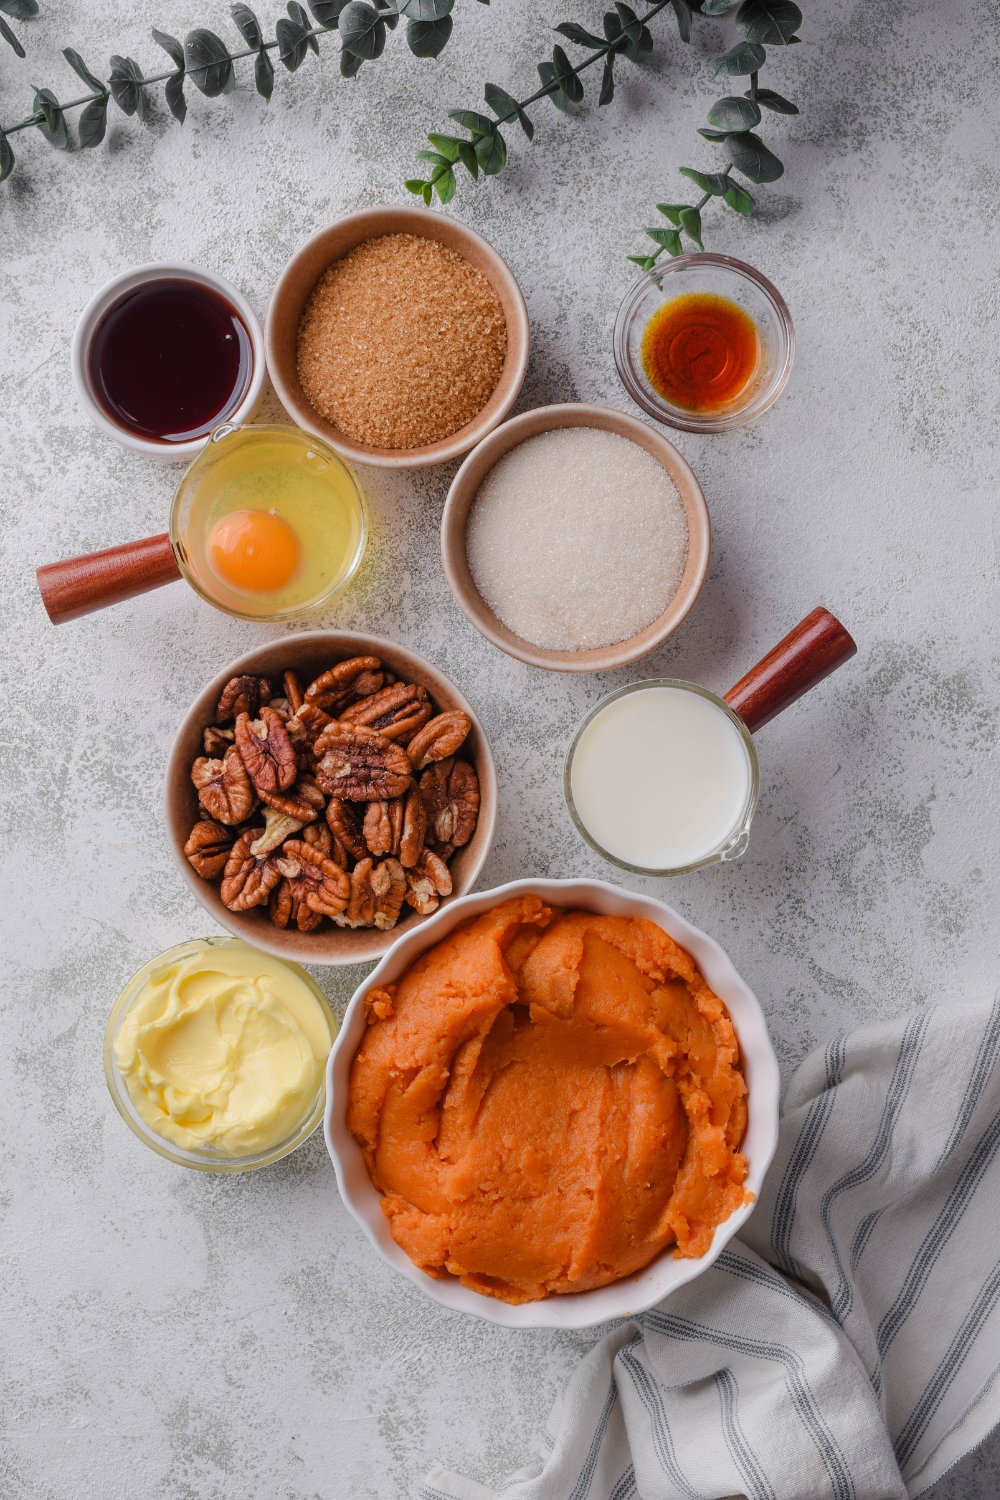 An assortment of ingredients including bowls of pecans, sweet potato puree, brown sugar, white sugar, vanilla extract, an egg, butter, and milk, all on a grey counter.